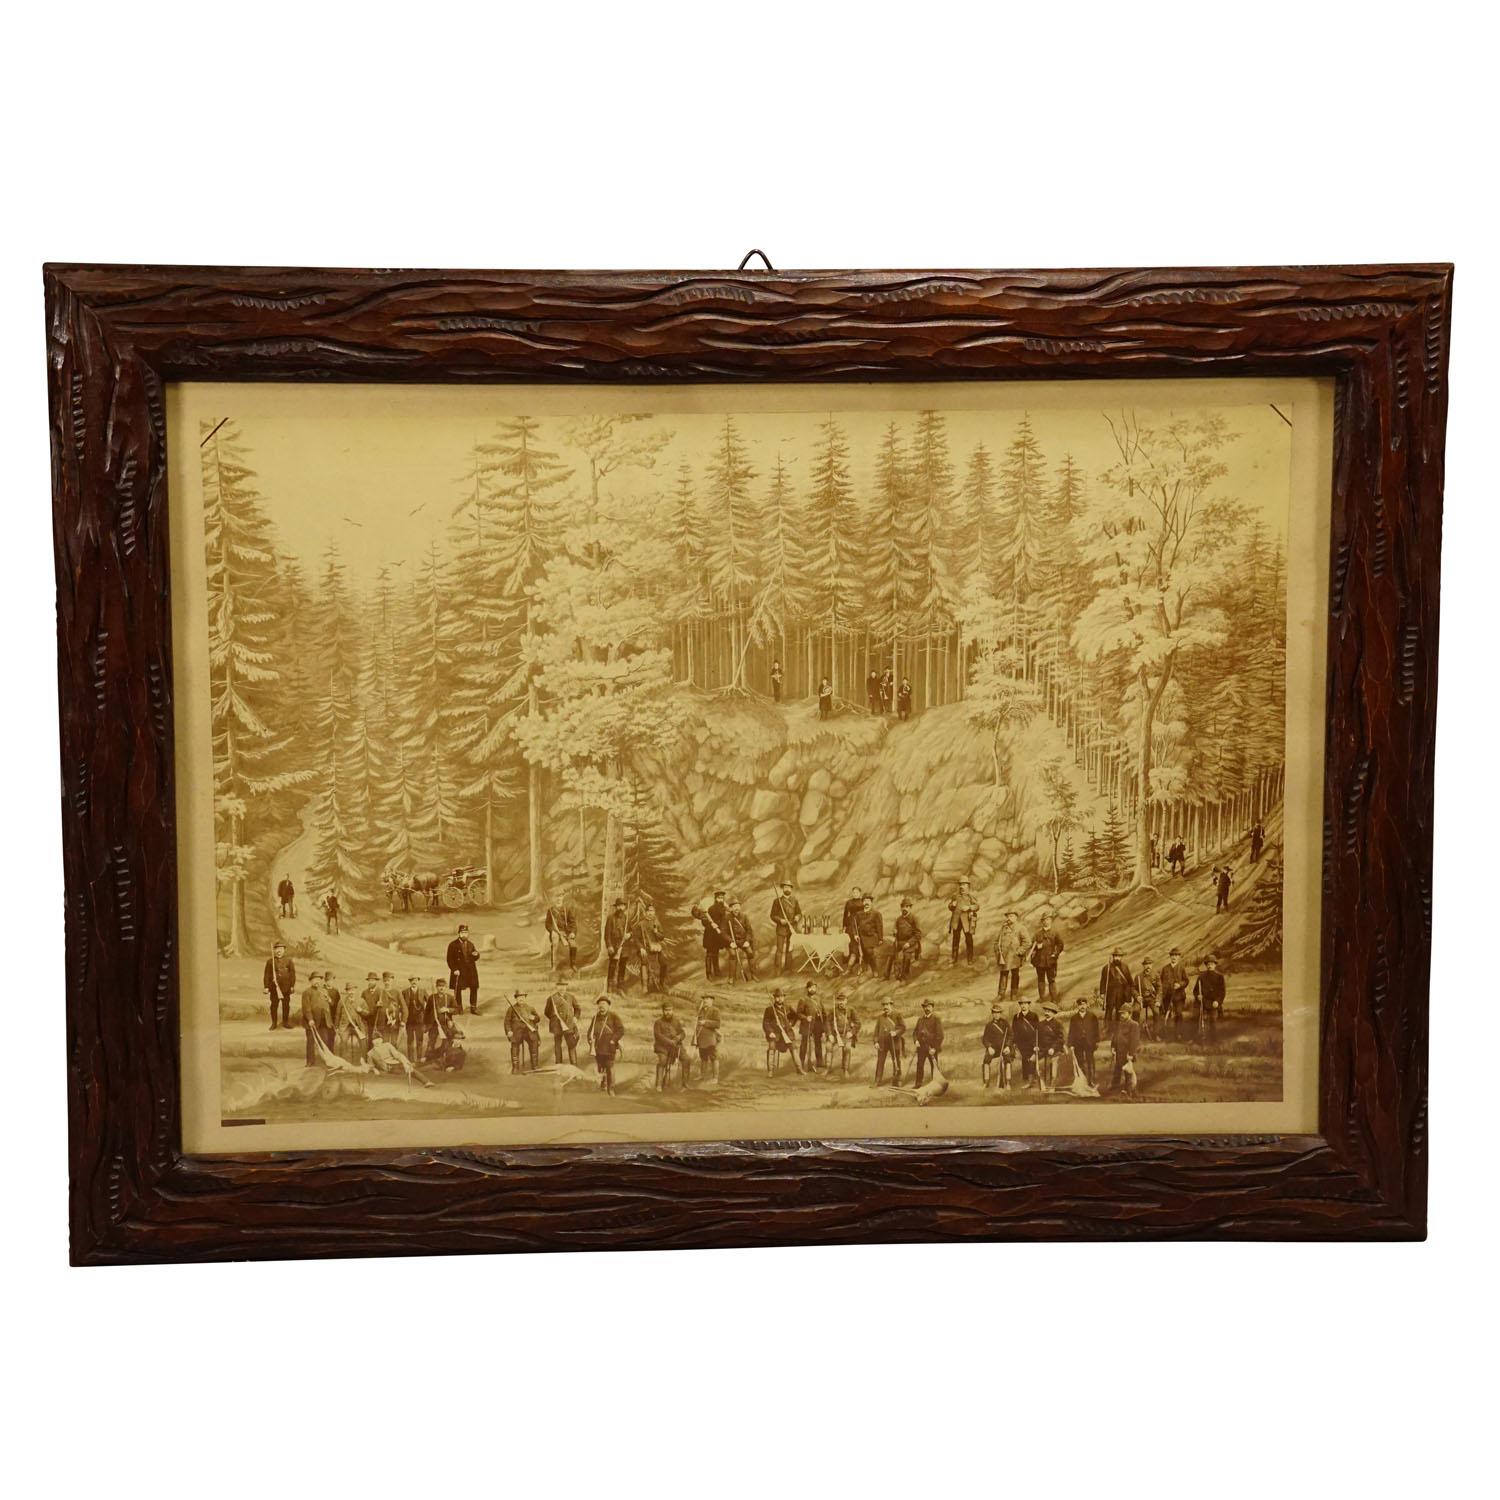 Antique Photo Print Collage with Hunt Company and Game in the Forest

An antique collage of several victorian hunters in a forest. Made with a painted forest als background where several cut out fotos of hunters where placed. The so created collage